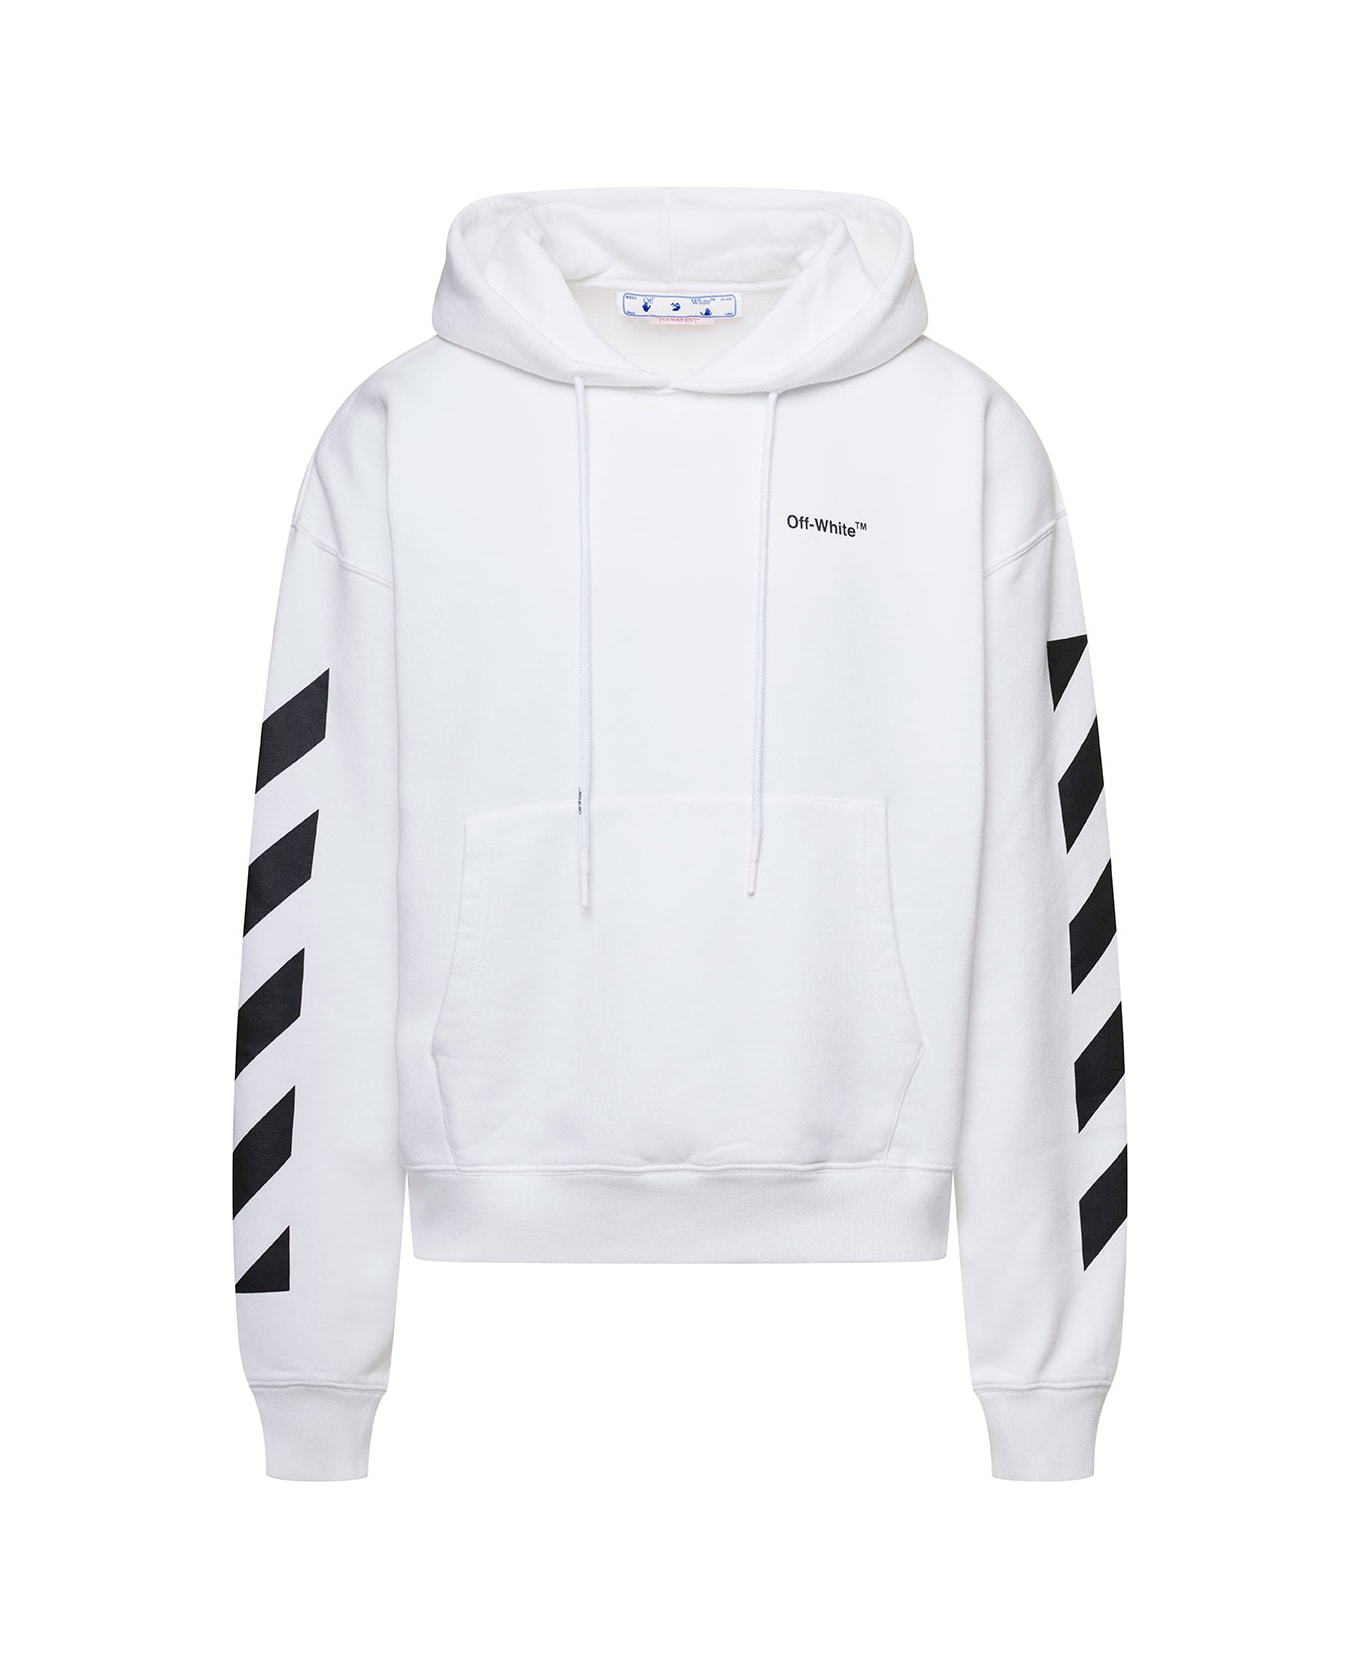 Off-White White Hoodie With Diag Print On Sleeve In Cotton Man - White